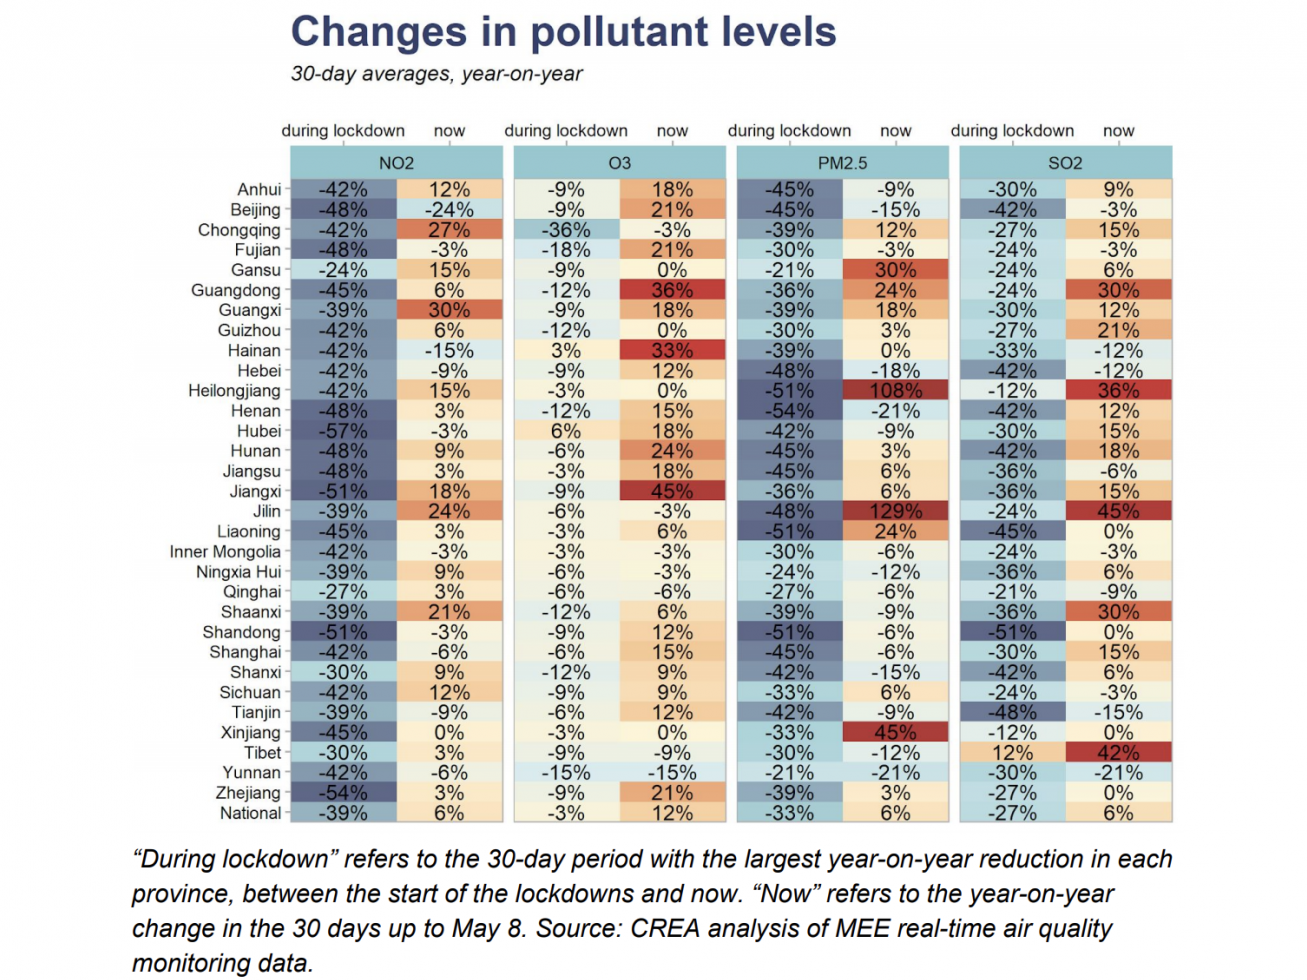 The changes in pollutant levels in China